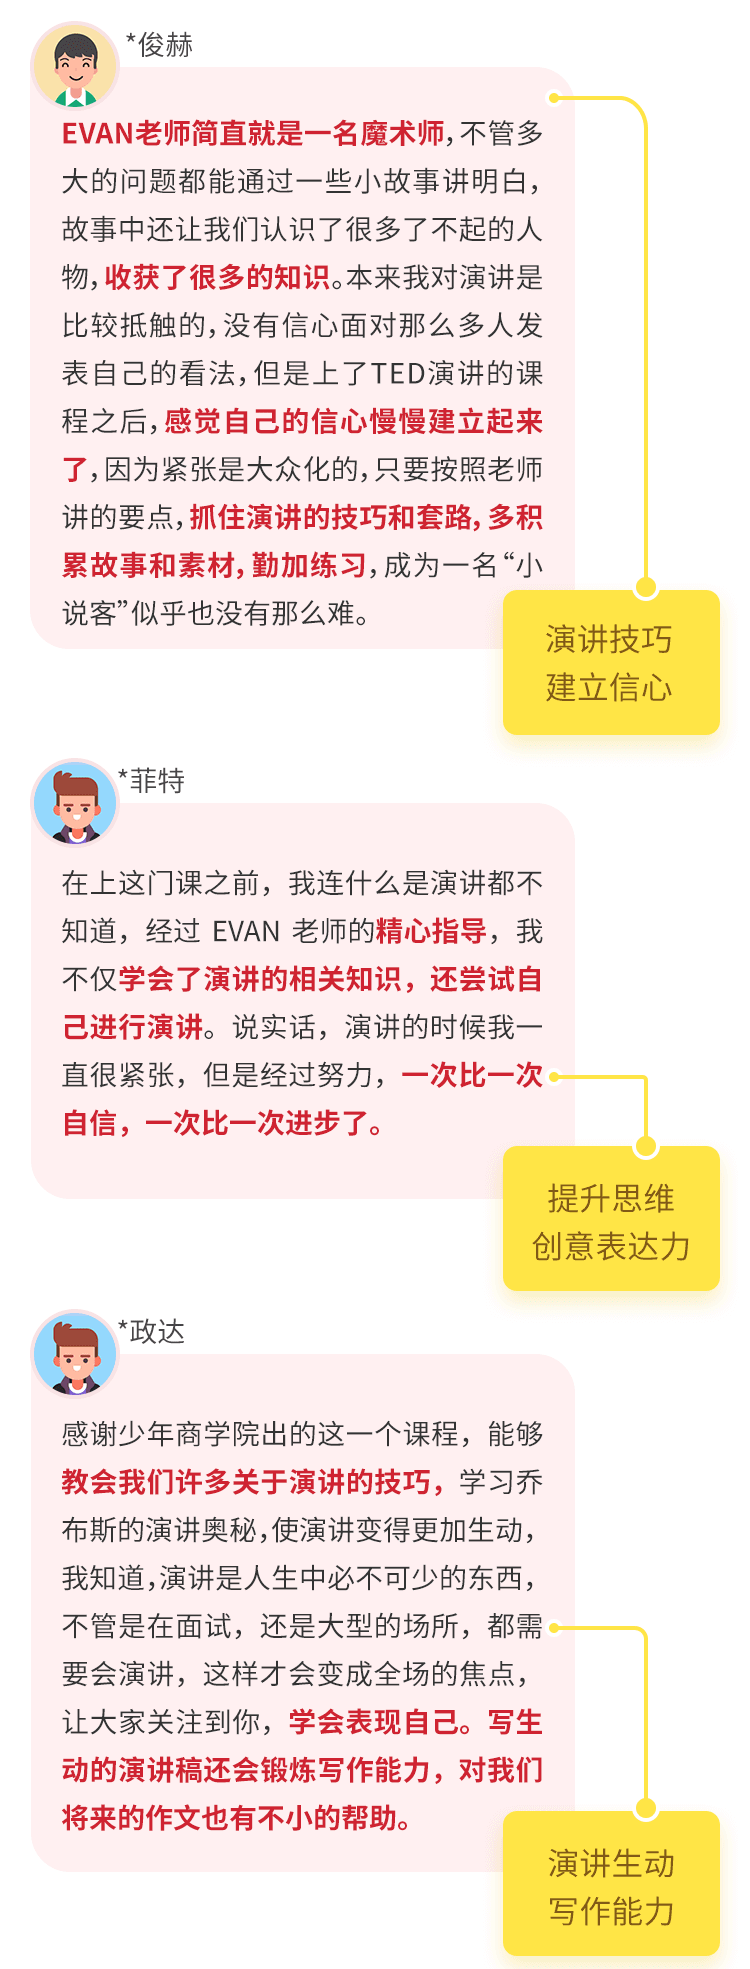 TED演讲力-02_02_02.png